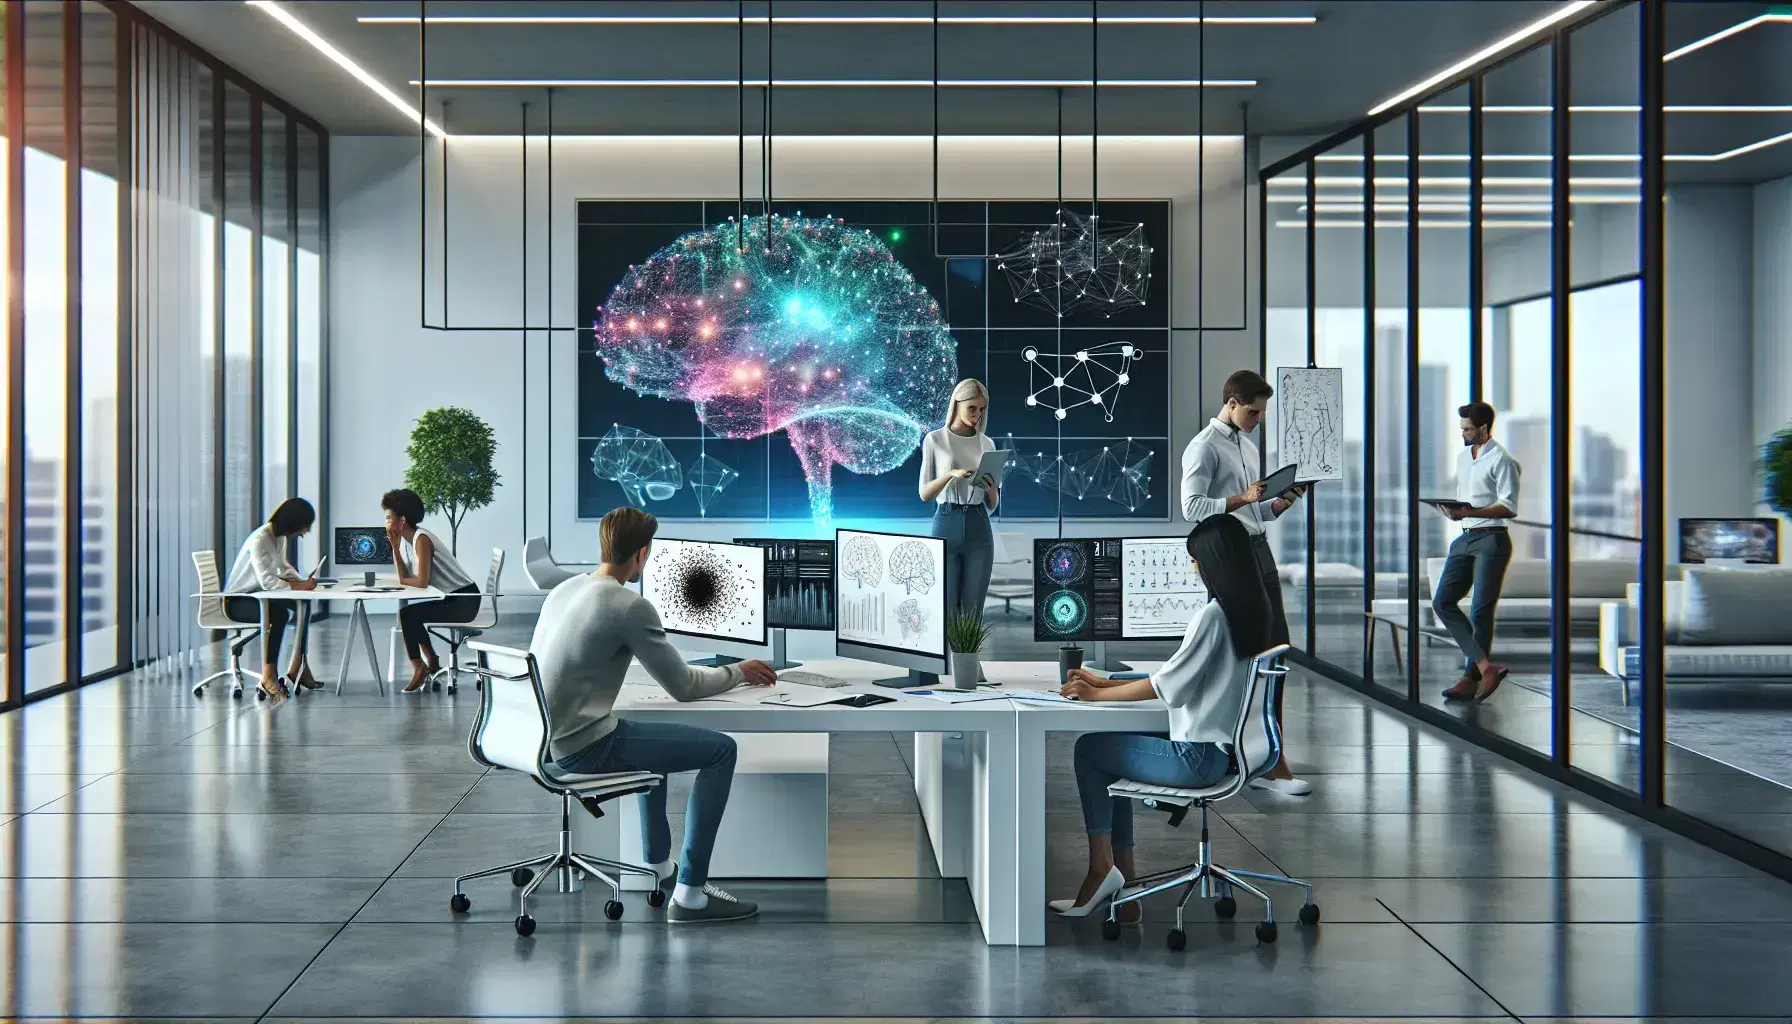 Modern and spacious office environment with people engaged in work activities, monitor with neural network, discussion with tablet and geometric sketches.